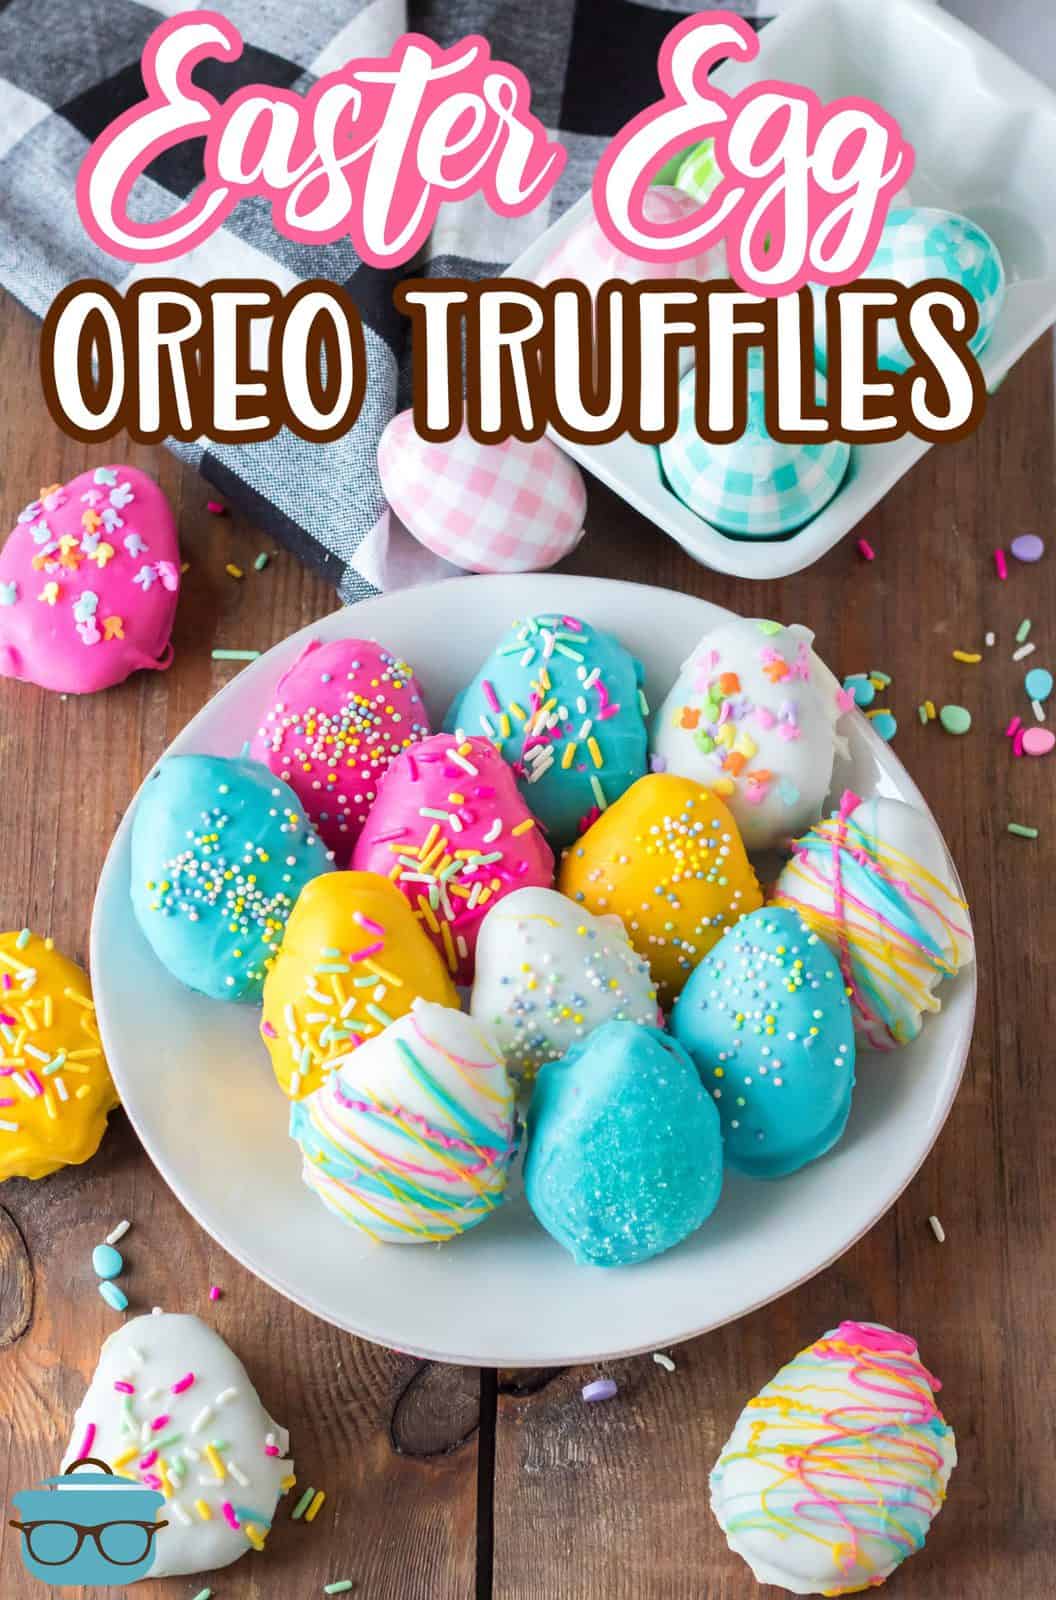 Pinterest image Easter Egg Oreo Truffles on plate with easter eggs and truffles around it.